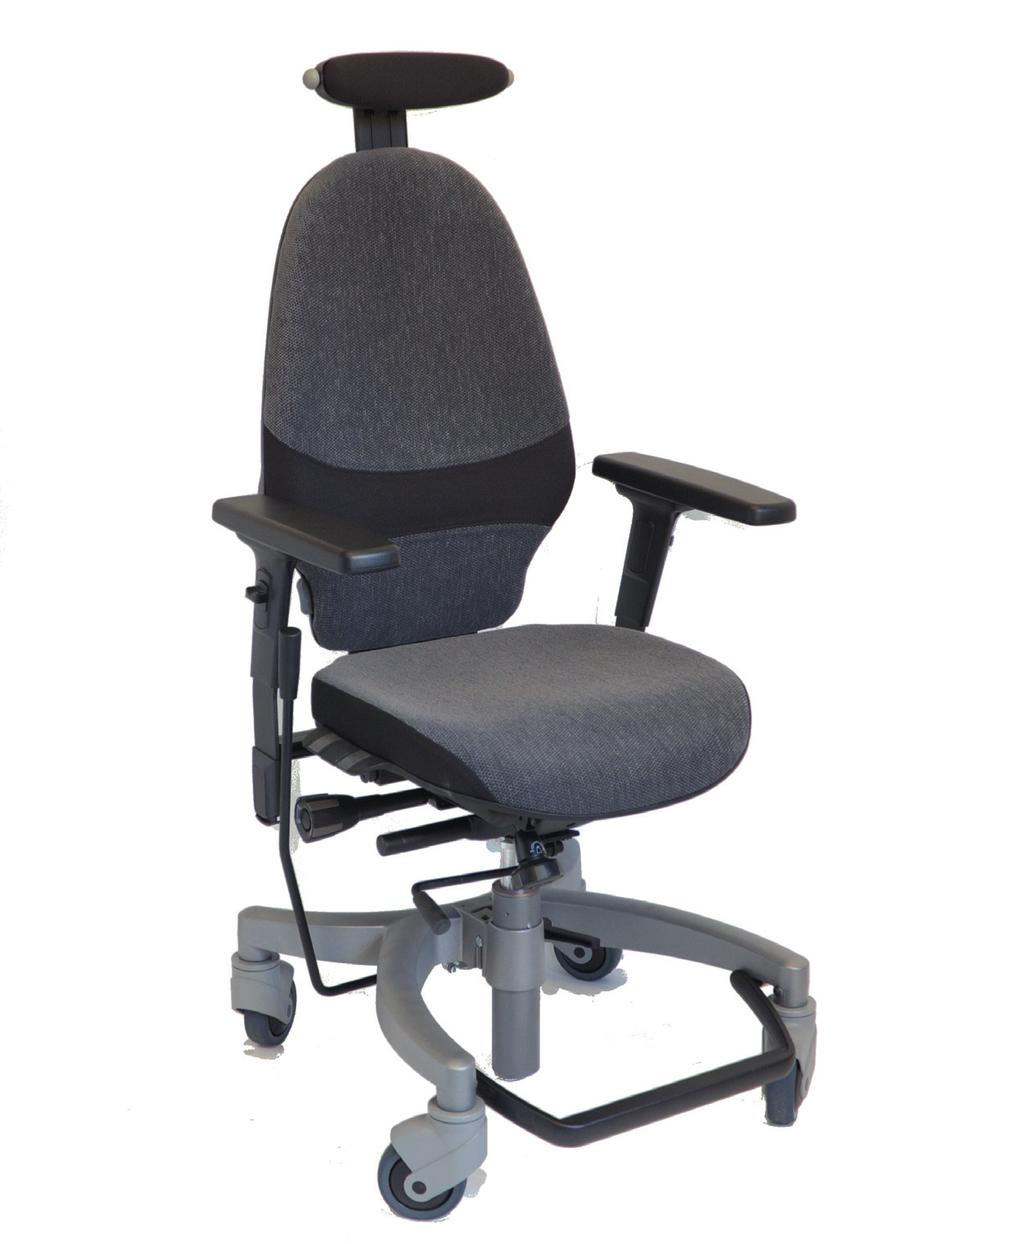 HEPRO E2 SYNKRON Work chairs with synchronized tilt of complete seat unit, electric seat lift. 7 Hepro E2 Synkron The angle between the seat and the backrest can easily be adjusted but not blocked.